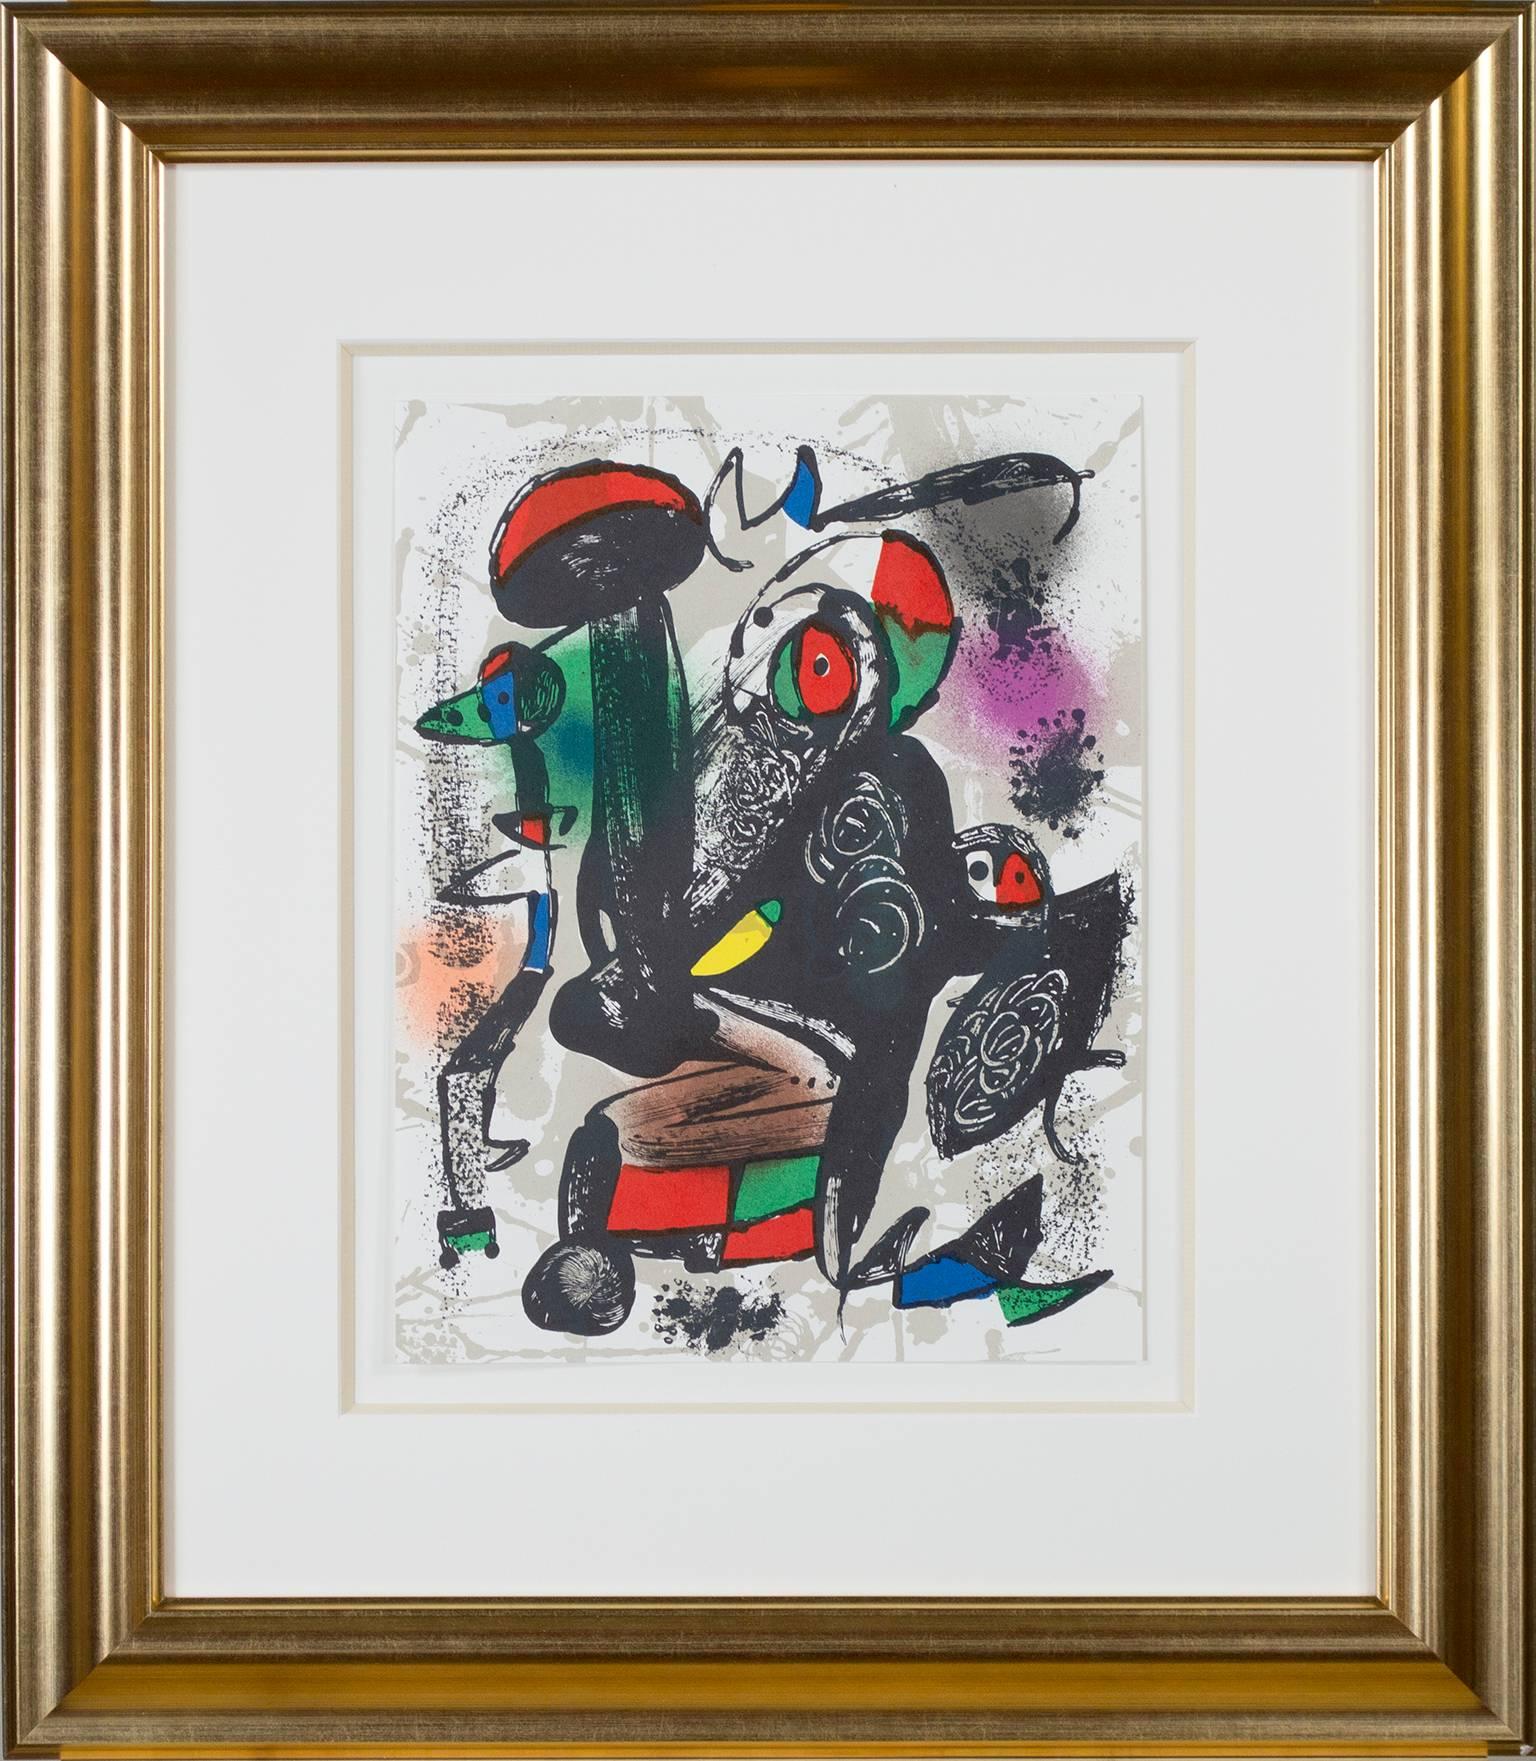 Lithographie Originale III, from Miro Lithographs IV, Maeght Publisher Joan Miró 2